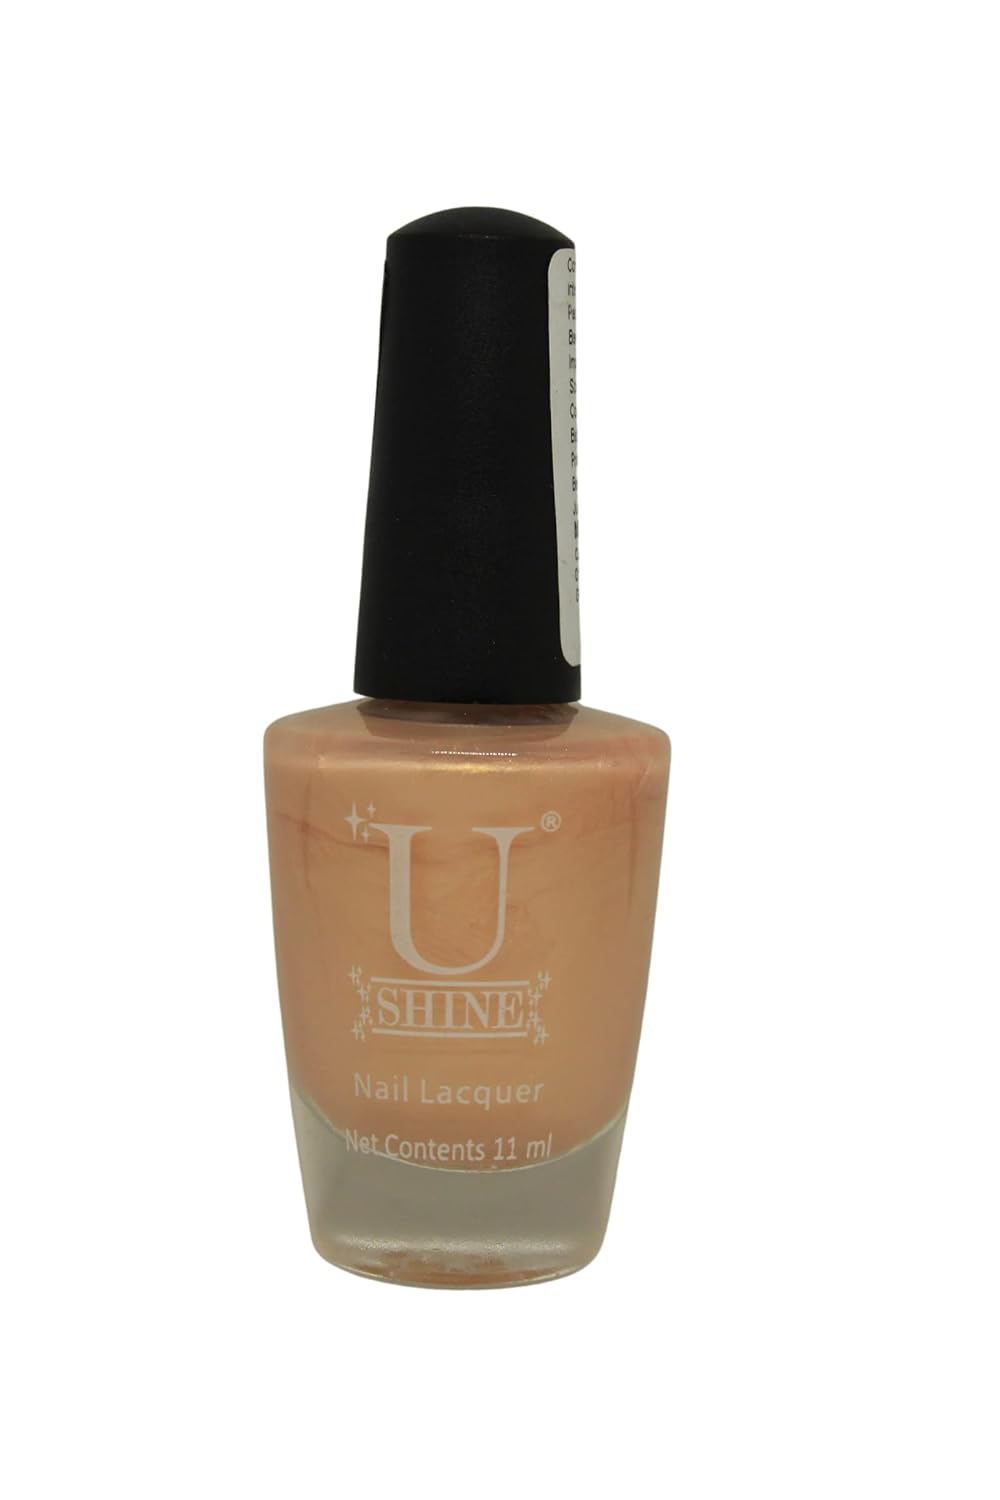 U Shine Biscuit On Diet |Pink & Metallic Gold Shimmer|Shimmer|11ml |No Paraben, Nail Yellowing, Chipping or Cracking & Long Wear | Vegan & FREE from Harmful Chemicals